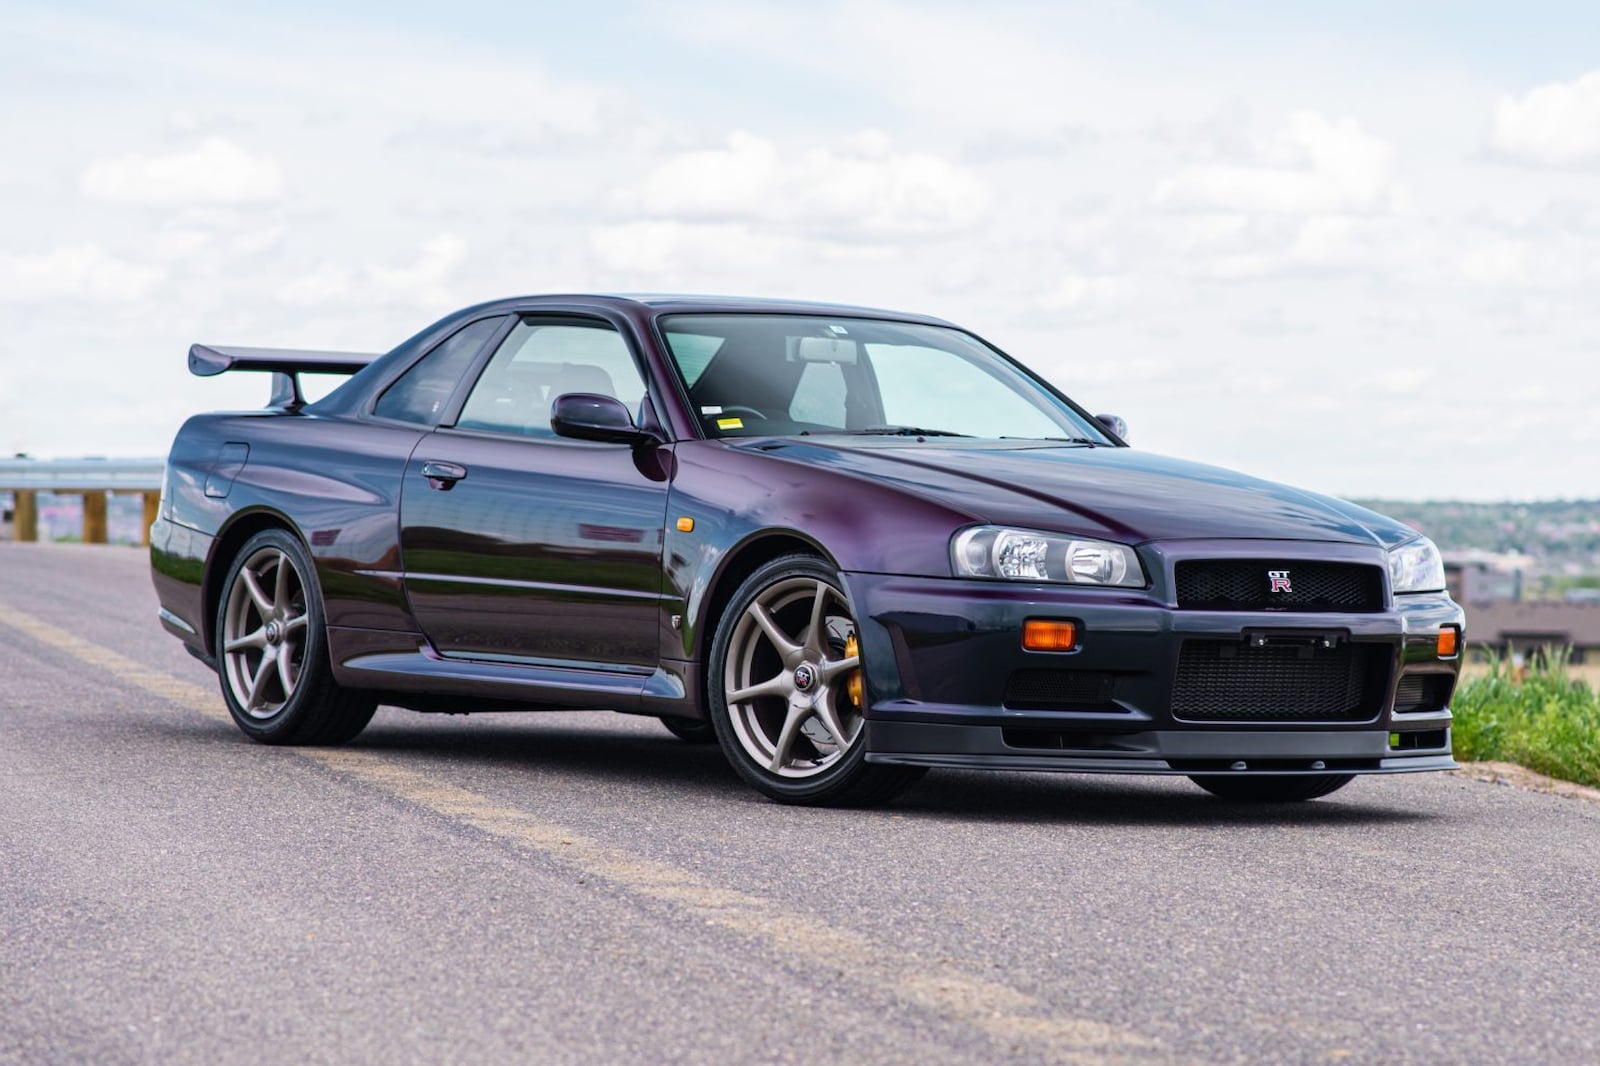 R34 Nissan Skyline Now Legal For Import But Americans Still Can't